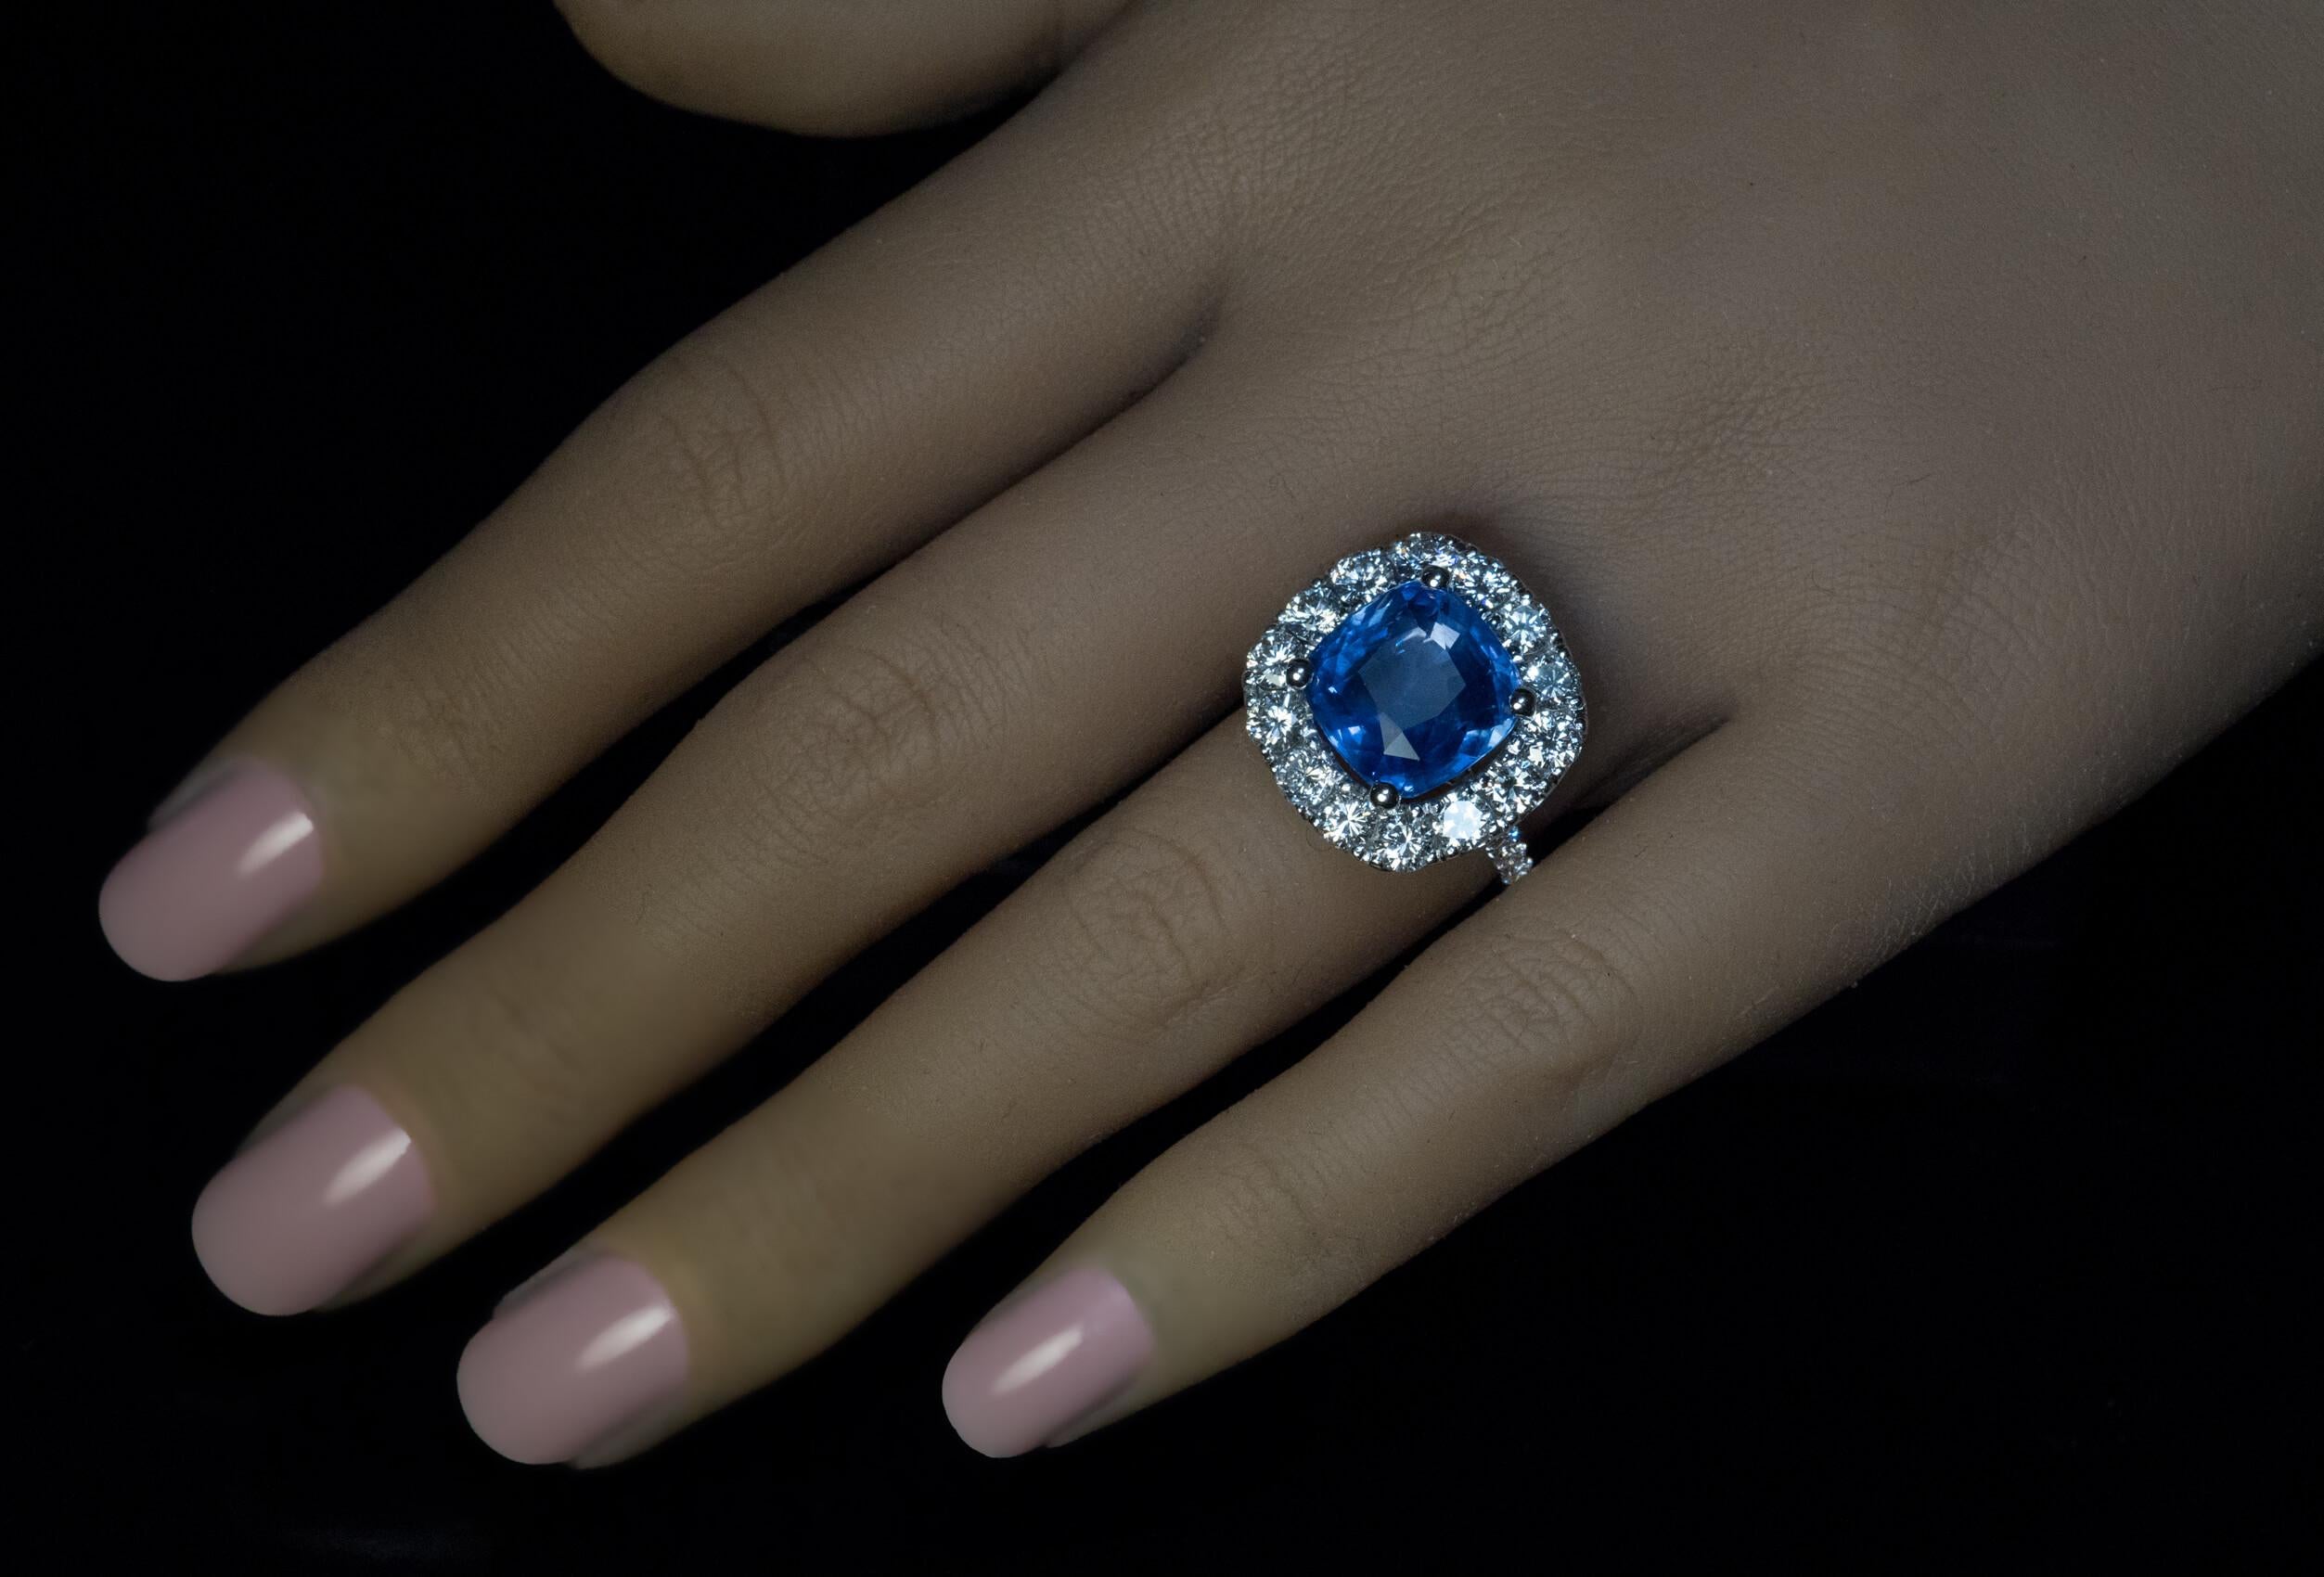 This impressive contemporary custom-made 18K white gold cluster ring features a natural unheated 9.33 carat cushion cut blue sapphire. The sapphired is surrounded by bright white brilliant cut diamonds.  Total sapphire weight is 9.33 carats. 